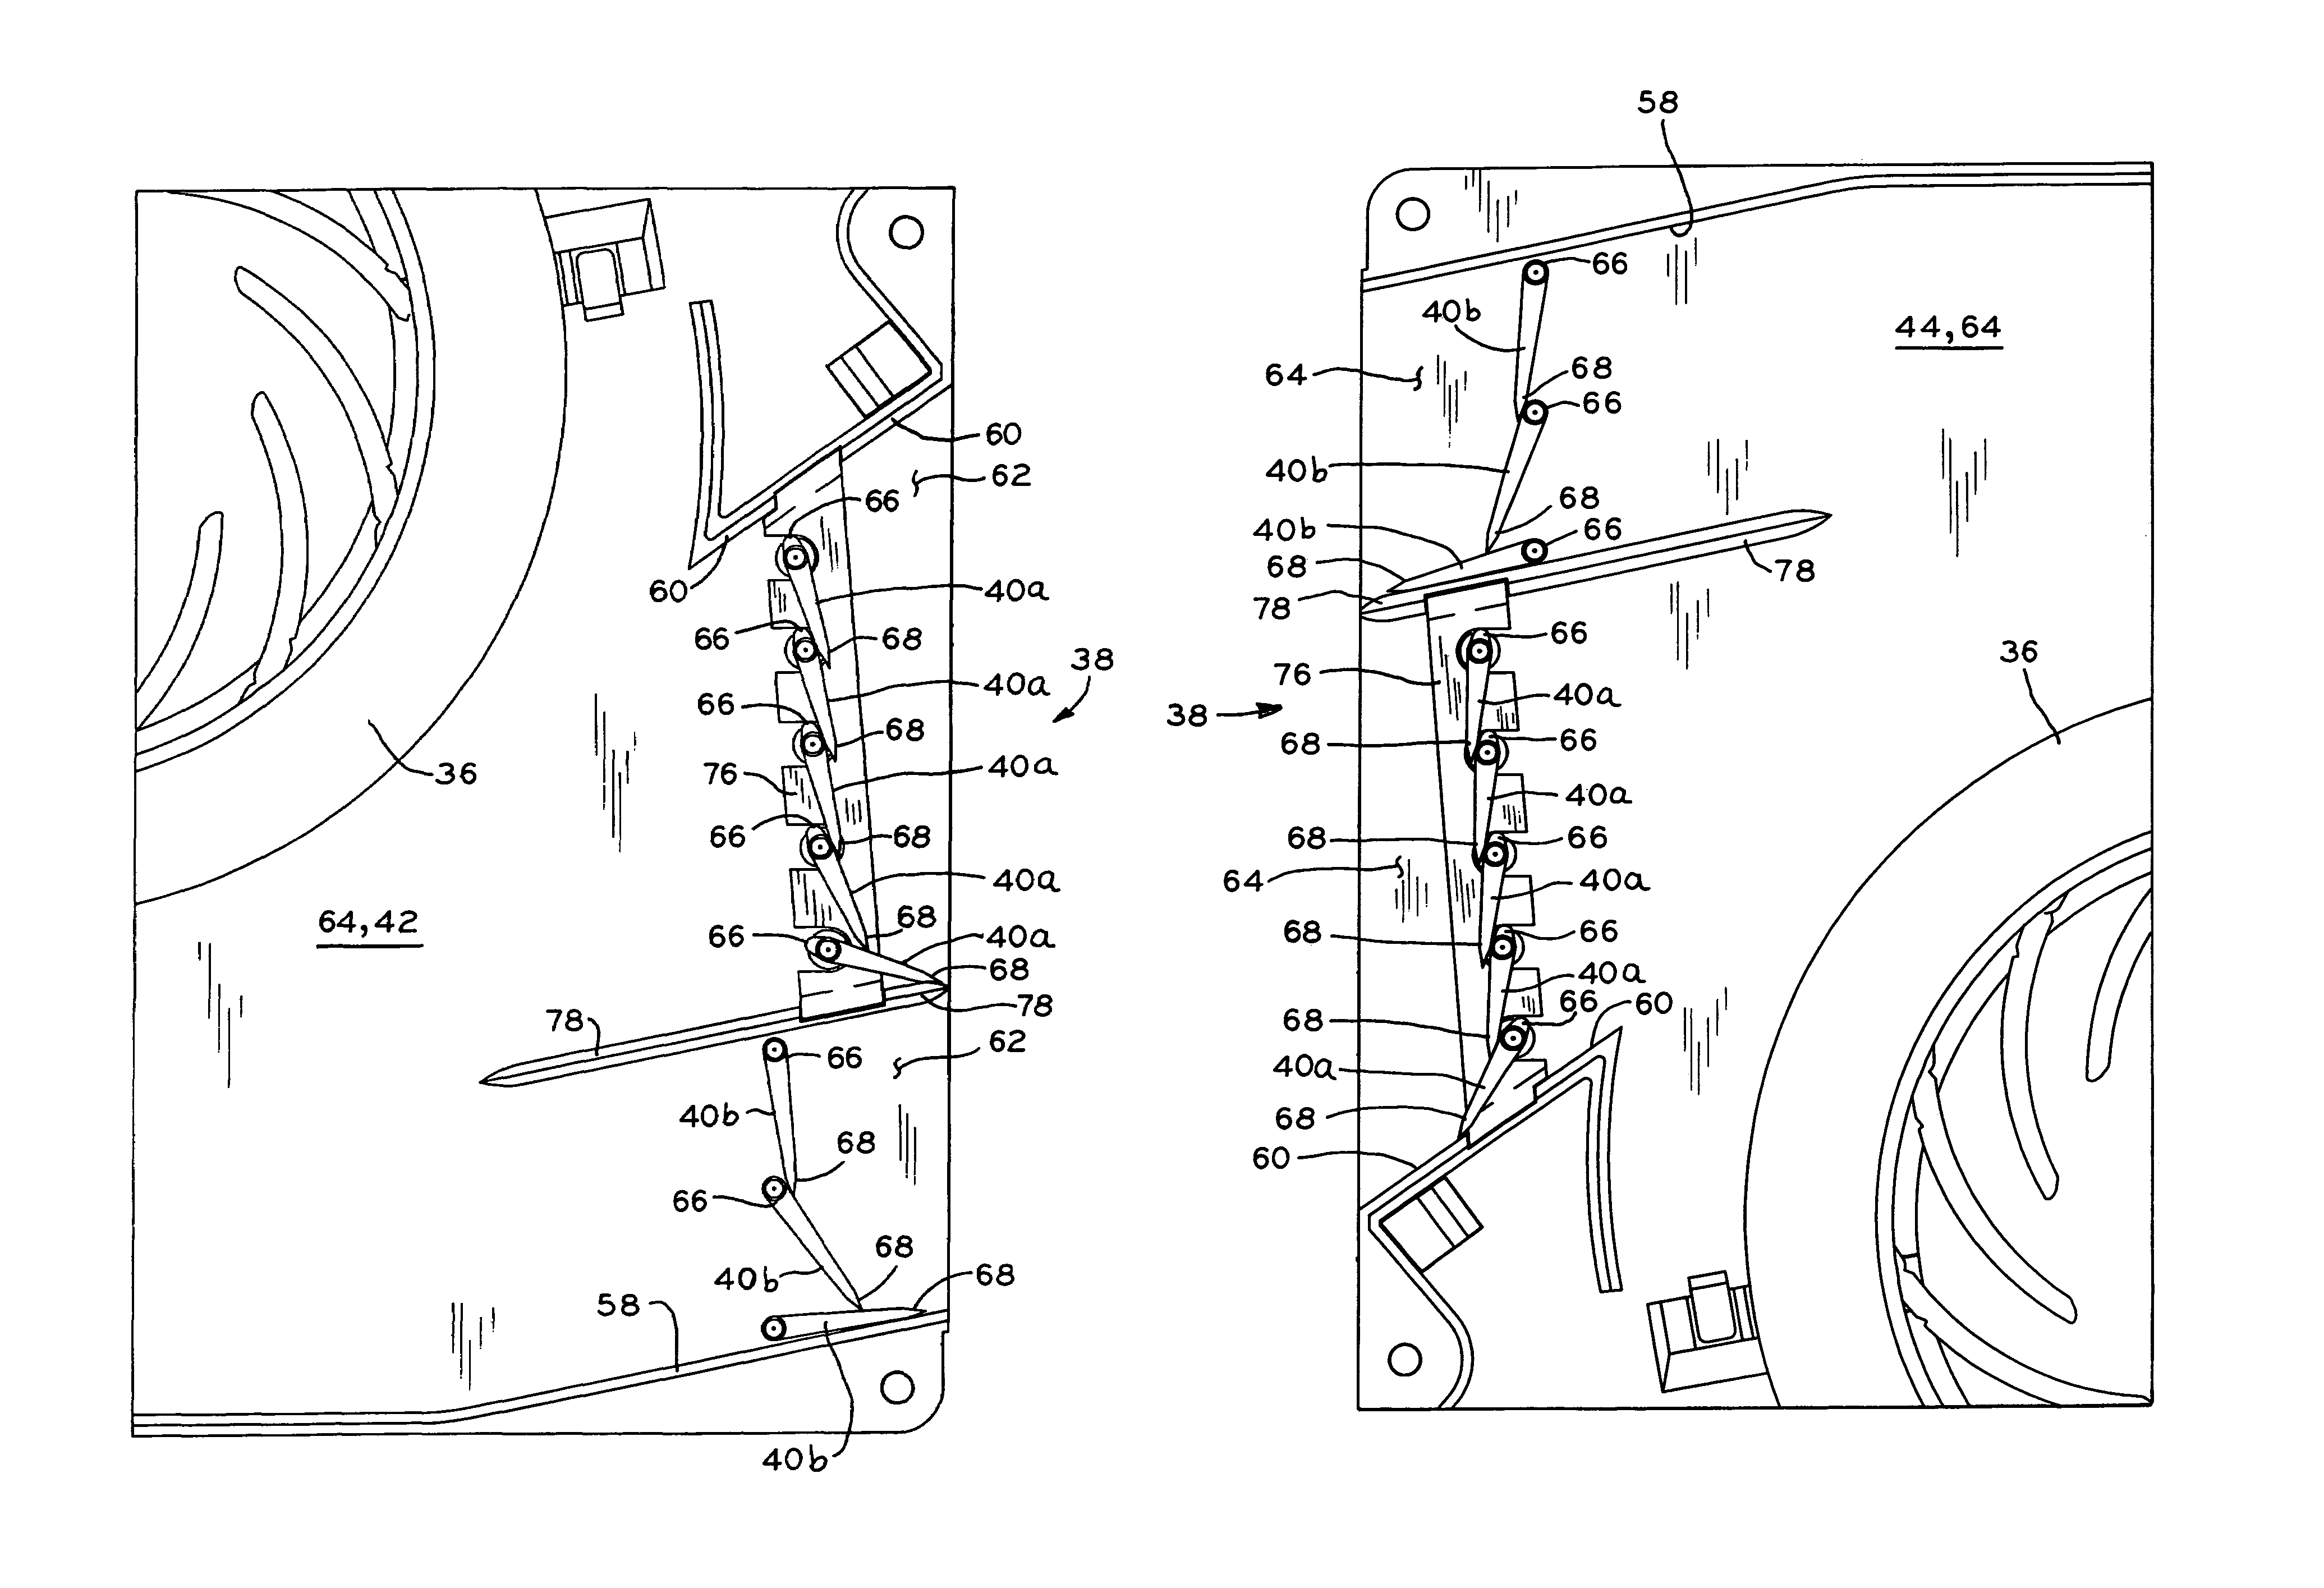 Anti-reverse flow mechanism for centrifugal blowers